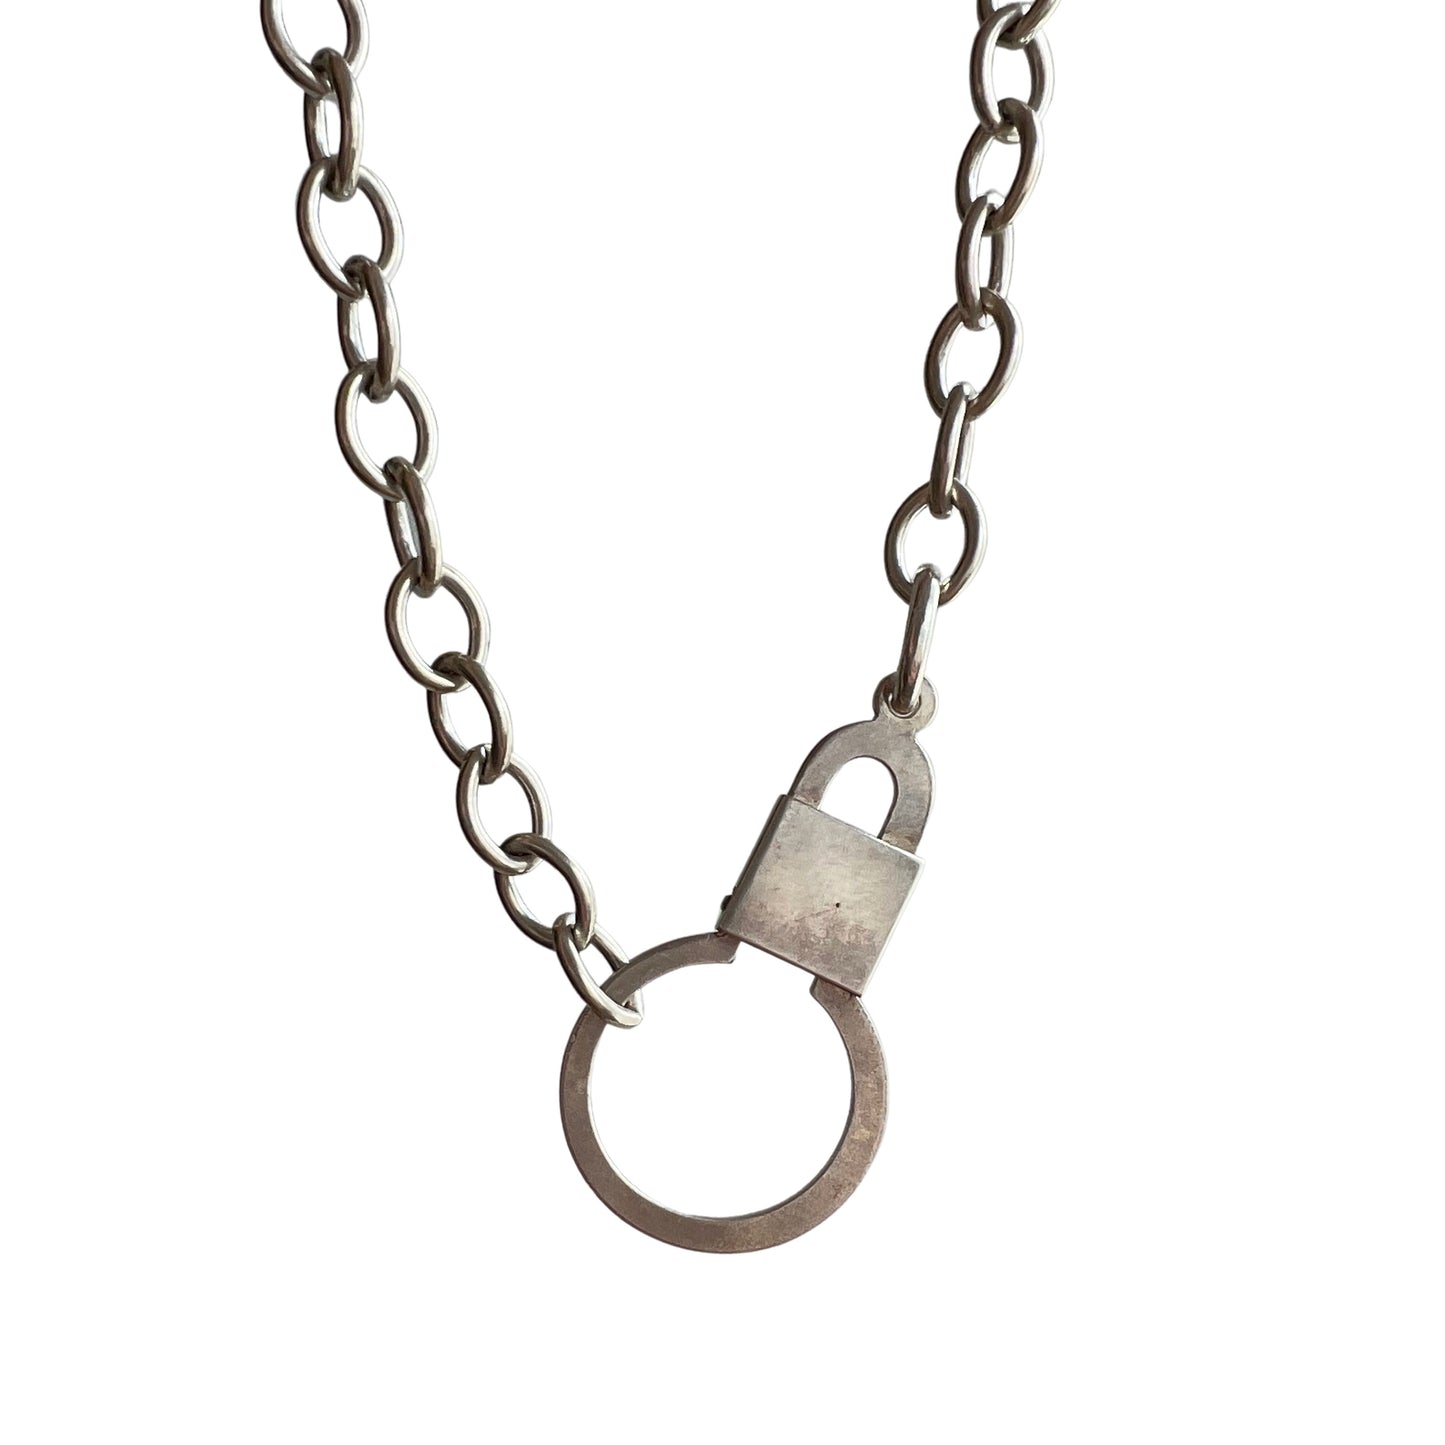 reimagined V I N T A G E // all linked up / sterling silver oval link cable chain with a connector clasp / 17.5"